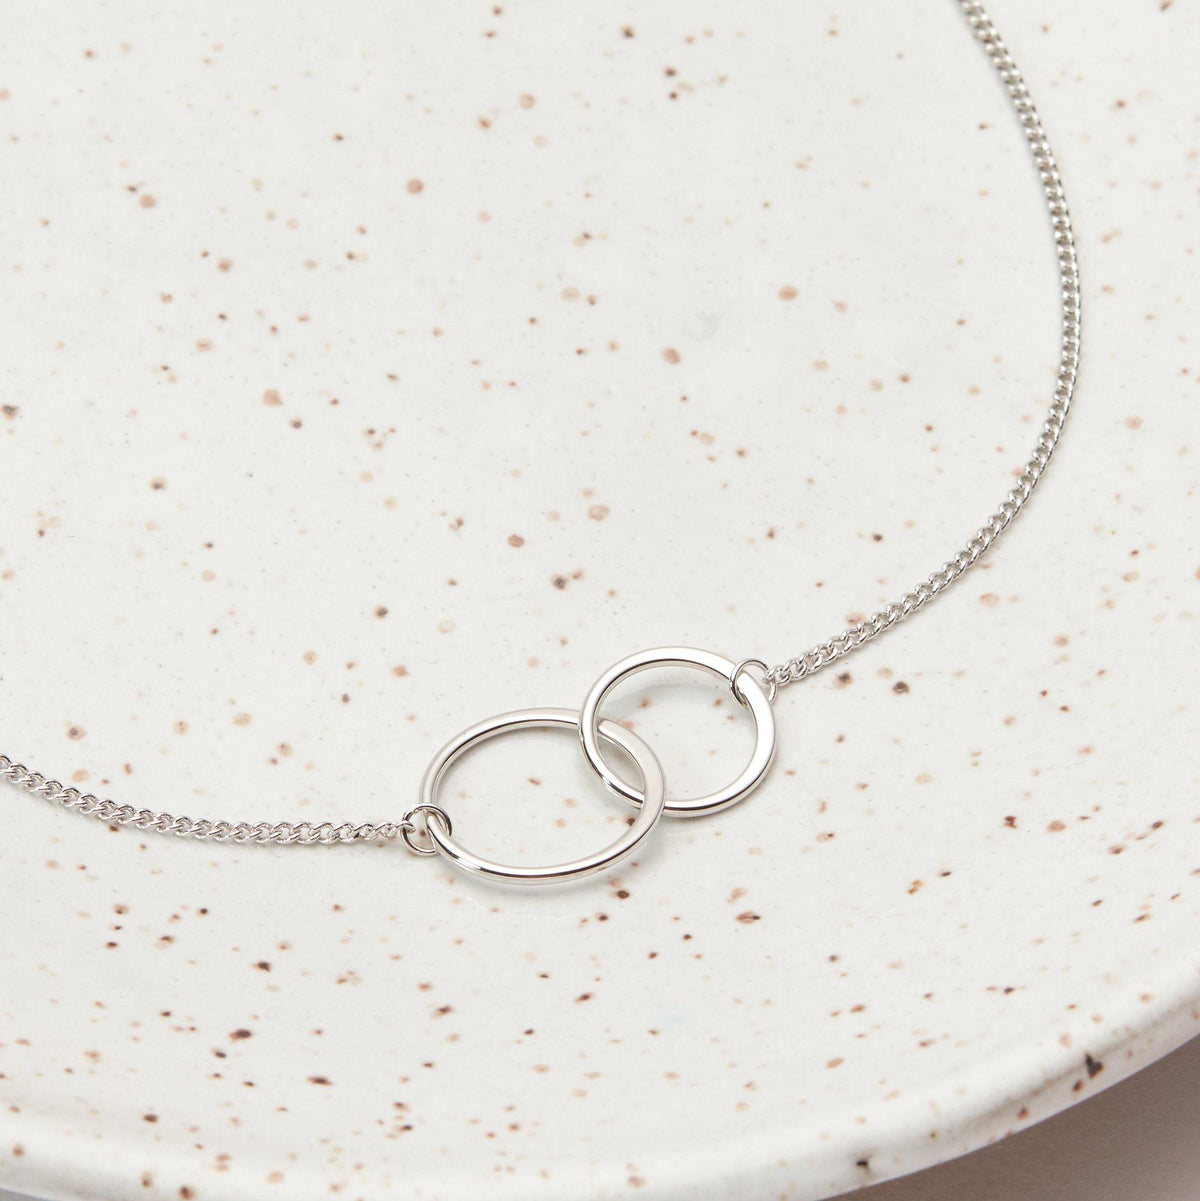 Gifts for 13 Year Old Girls Necklace, Multiple Styles, Infinity Cross / Rose Gold